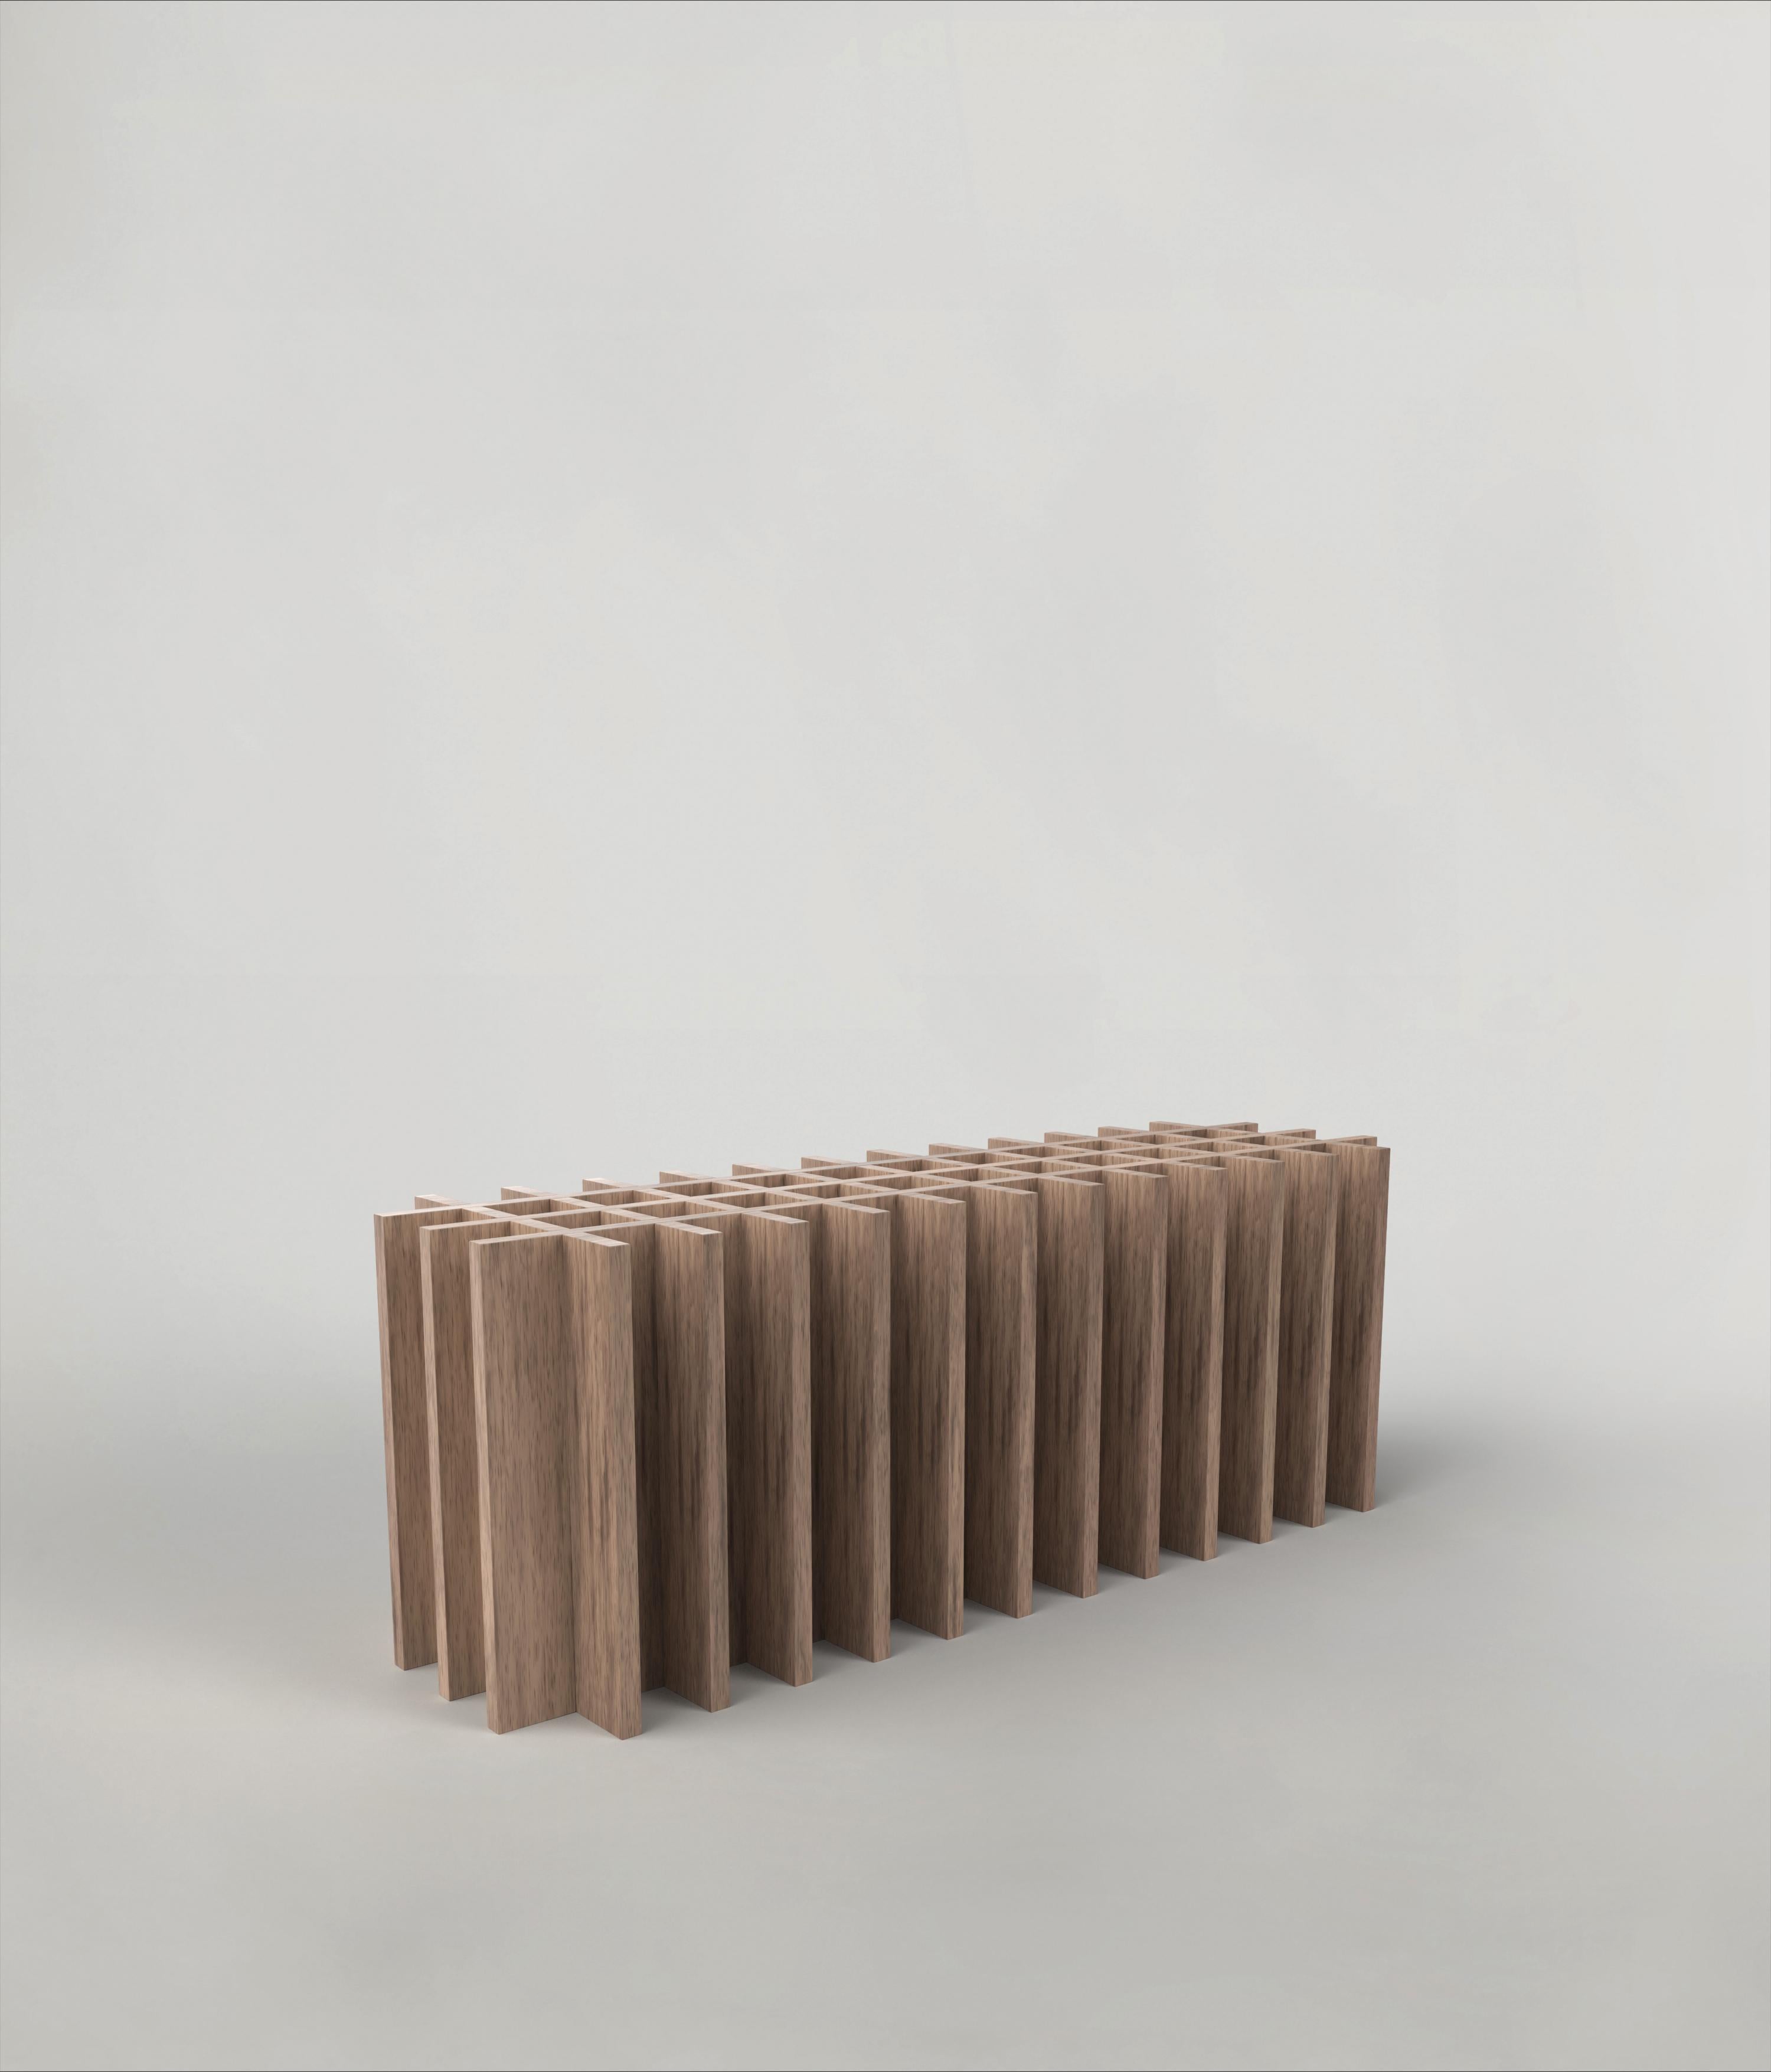 Arca V2 Bench by Edizione Limitata
Limited Edition of 150 pieces. Signed and numbered.
Dimensions: D117 x W35 x H42 cm
Materials: Solid Ash Wood

These contemporary solid wood pieces are manufactured by the excellence of Italian craftmanship. It is